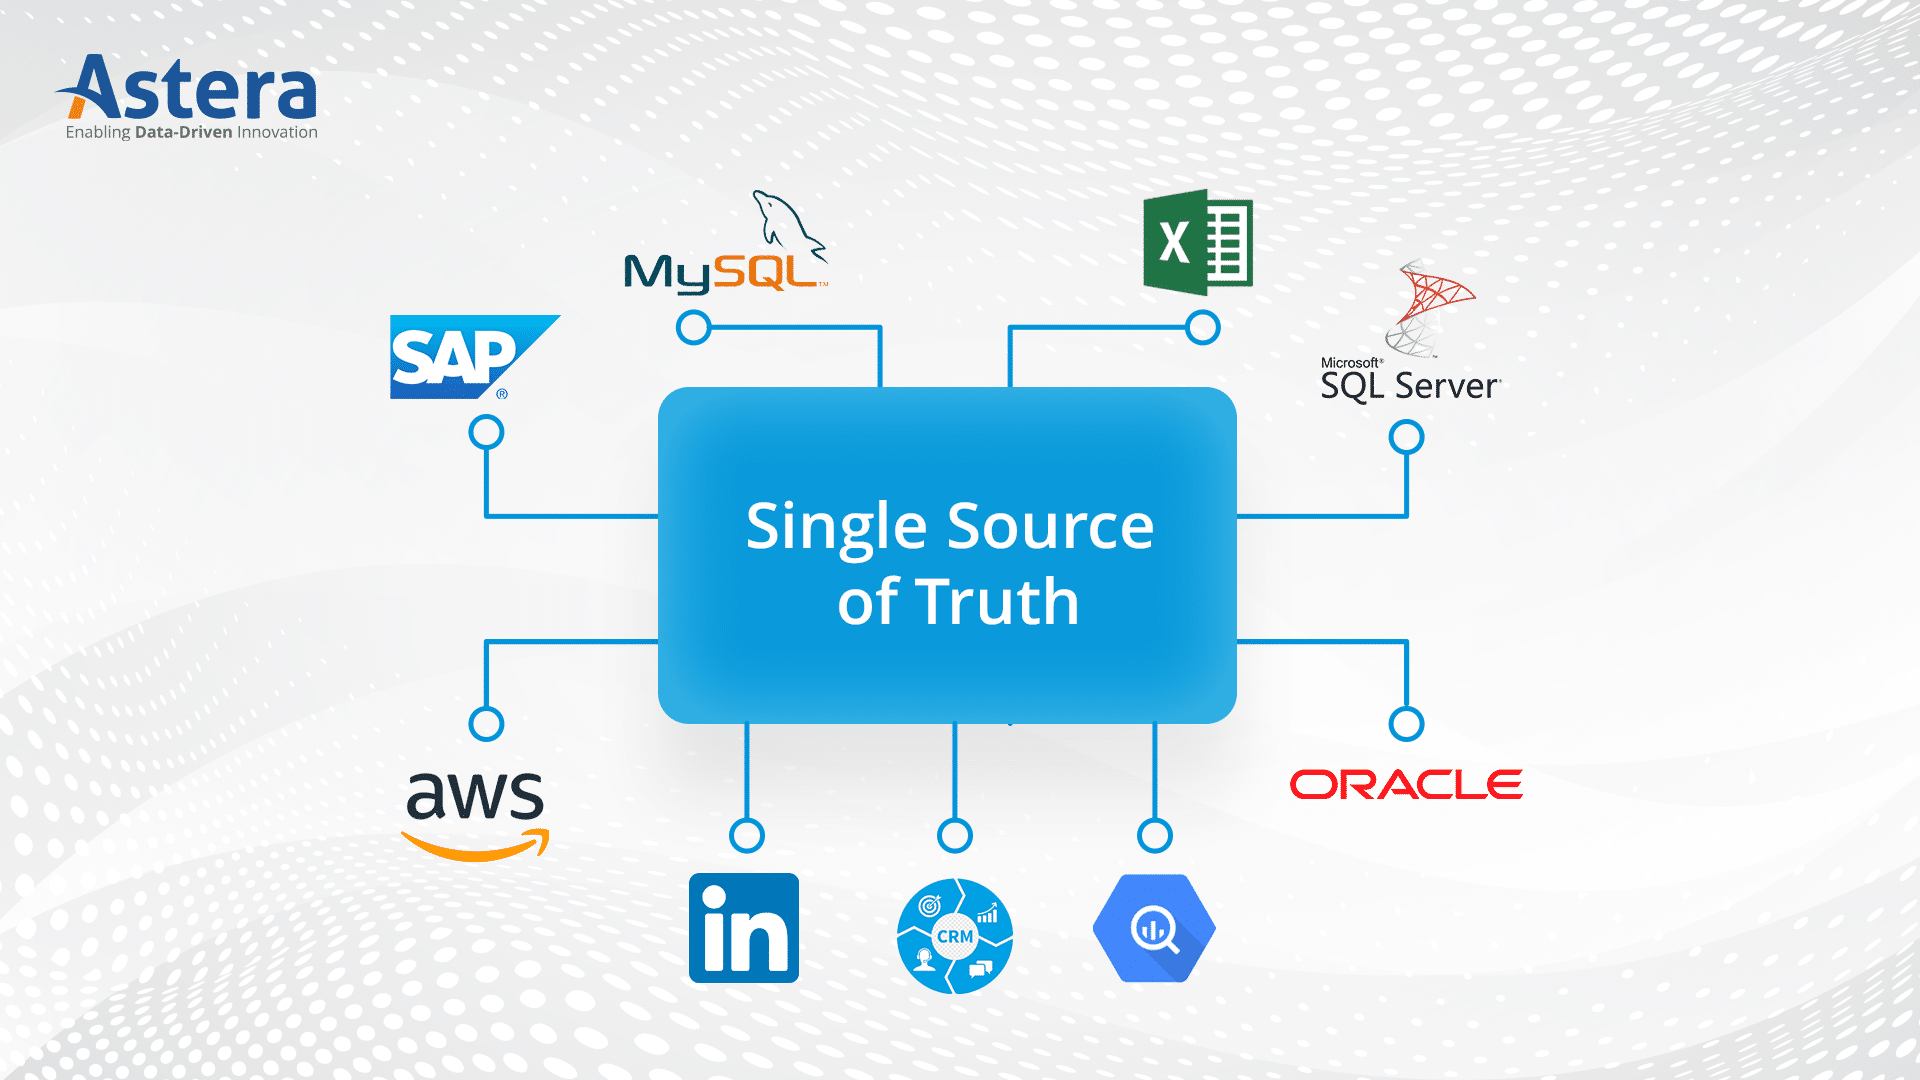 Combine data from multiple sources into your data stack and build a single source of truth.